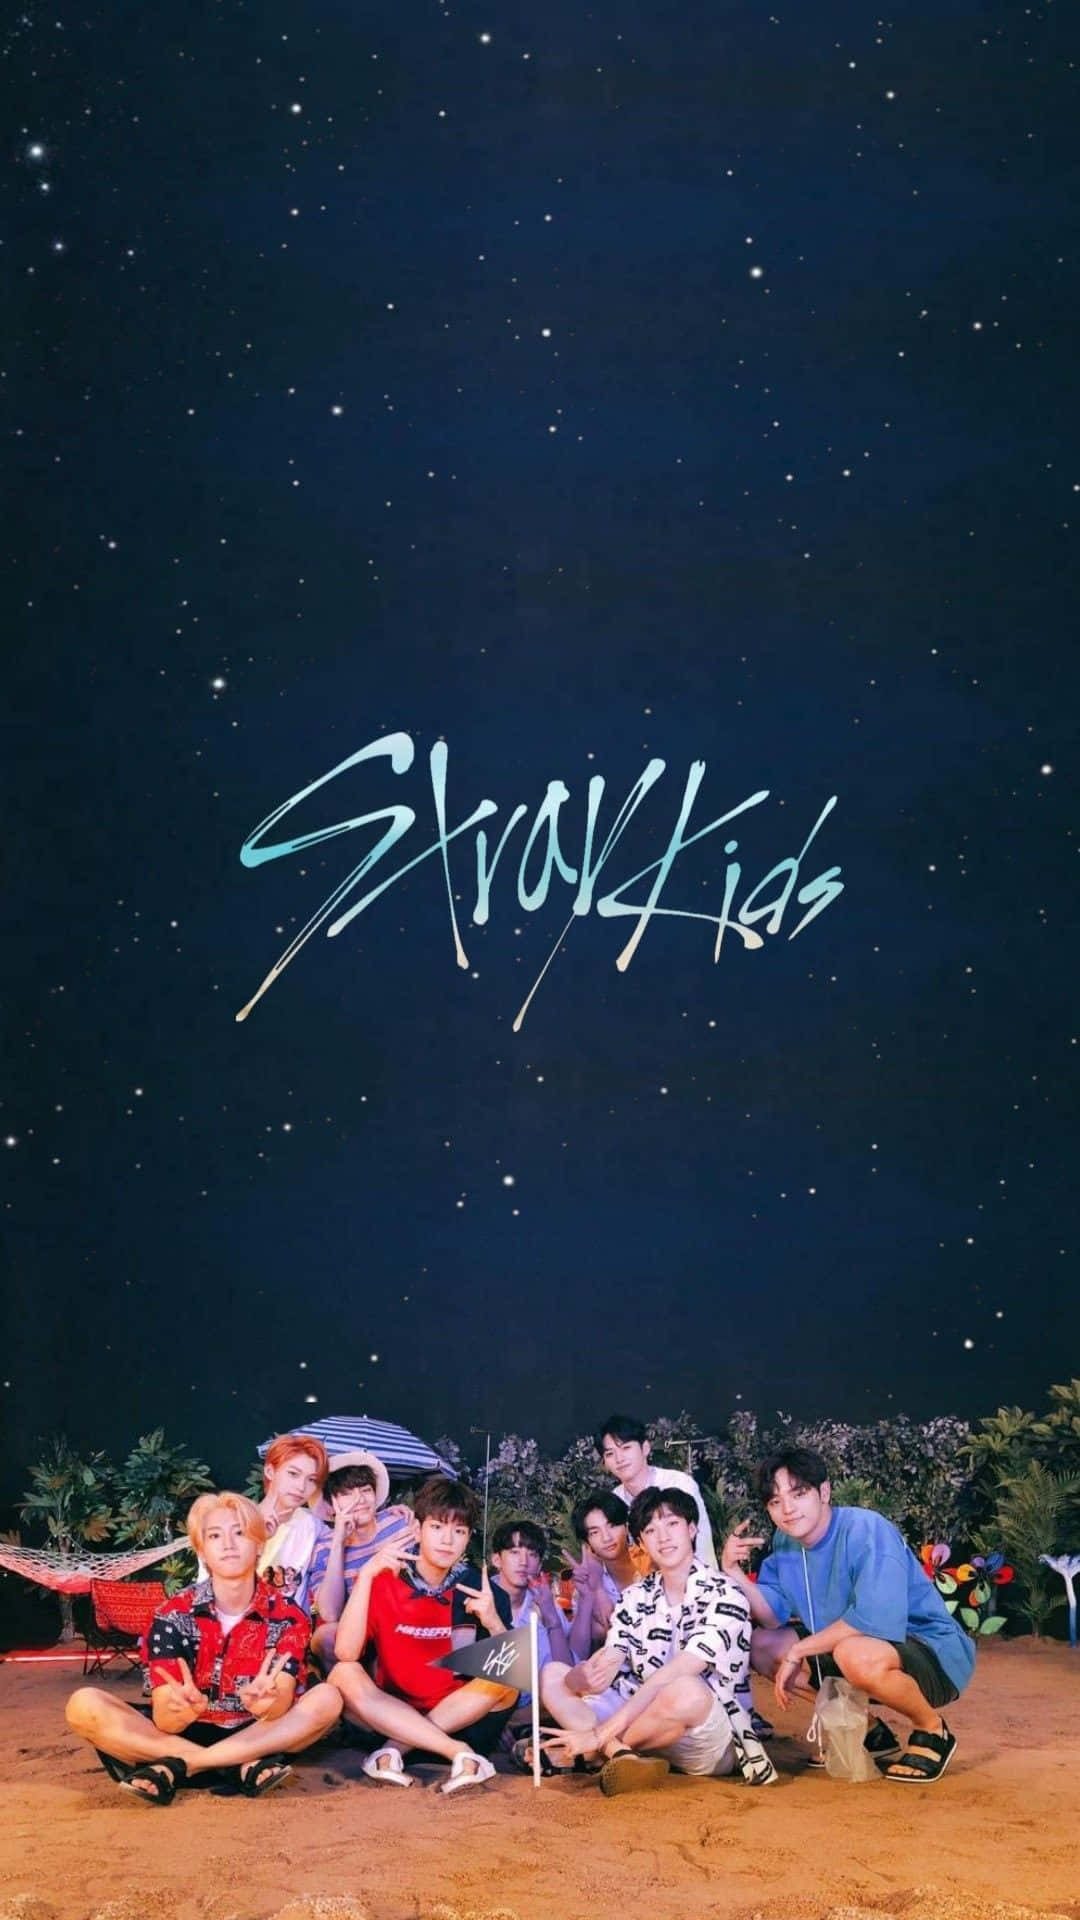 Get to know Stray Kids and their music in 2020! Wallpaper